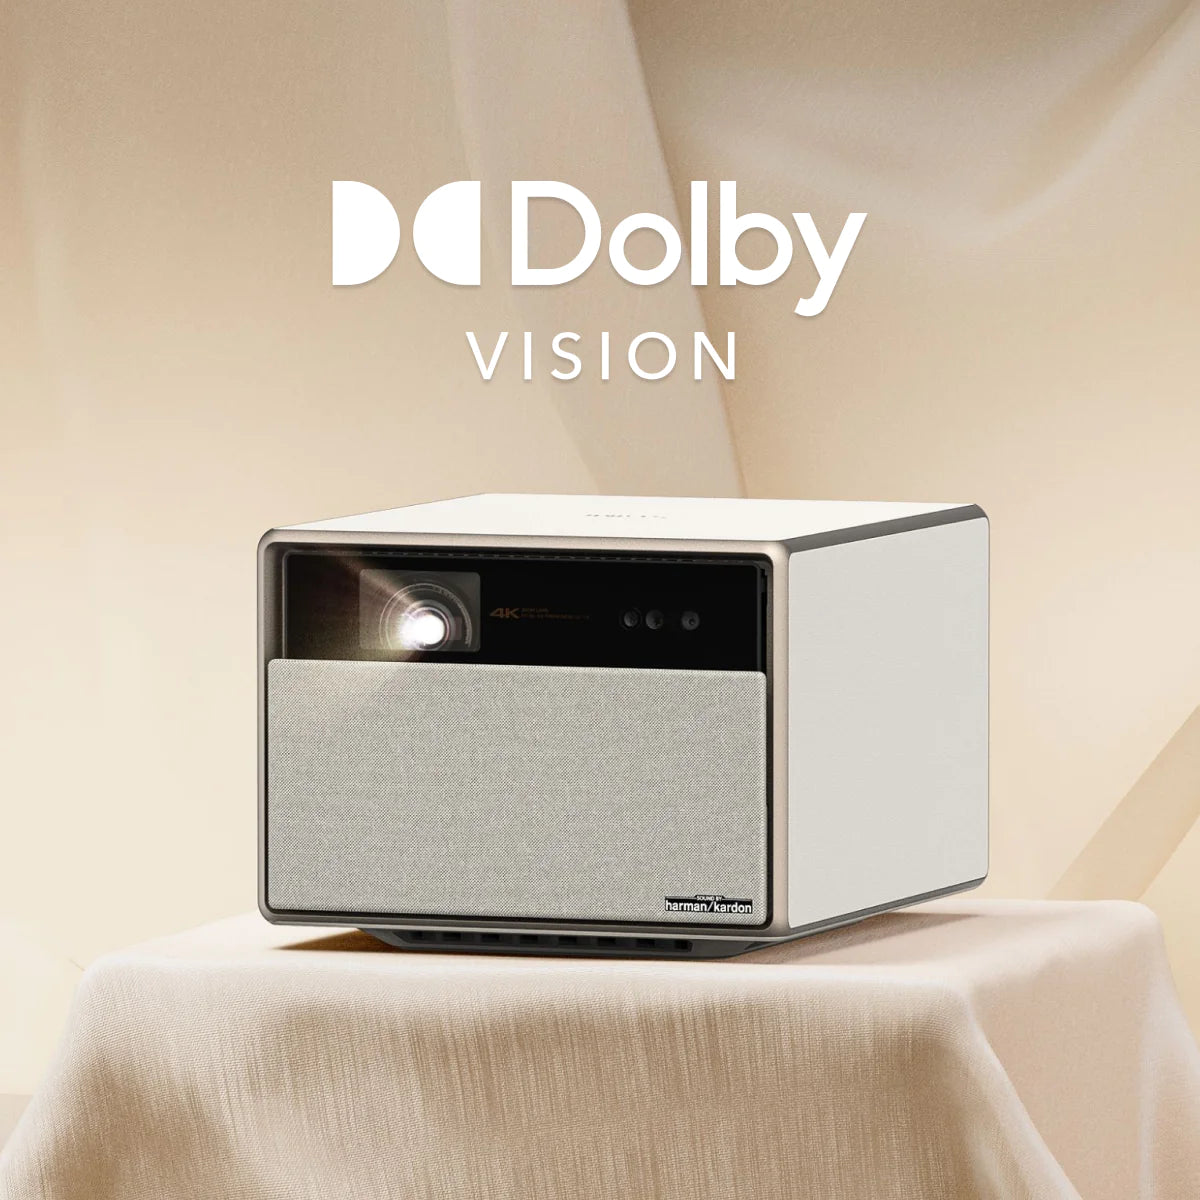 How Can I Watch Dolby Vision at Home?